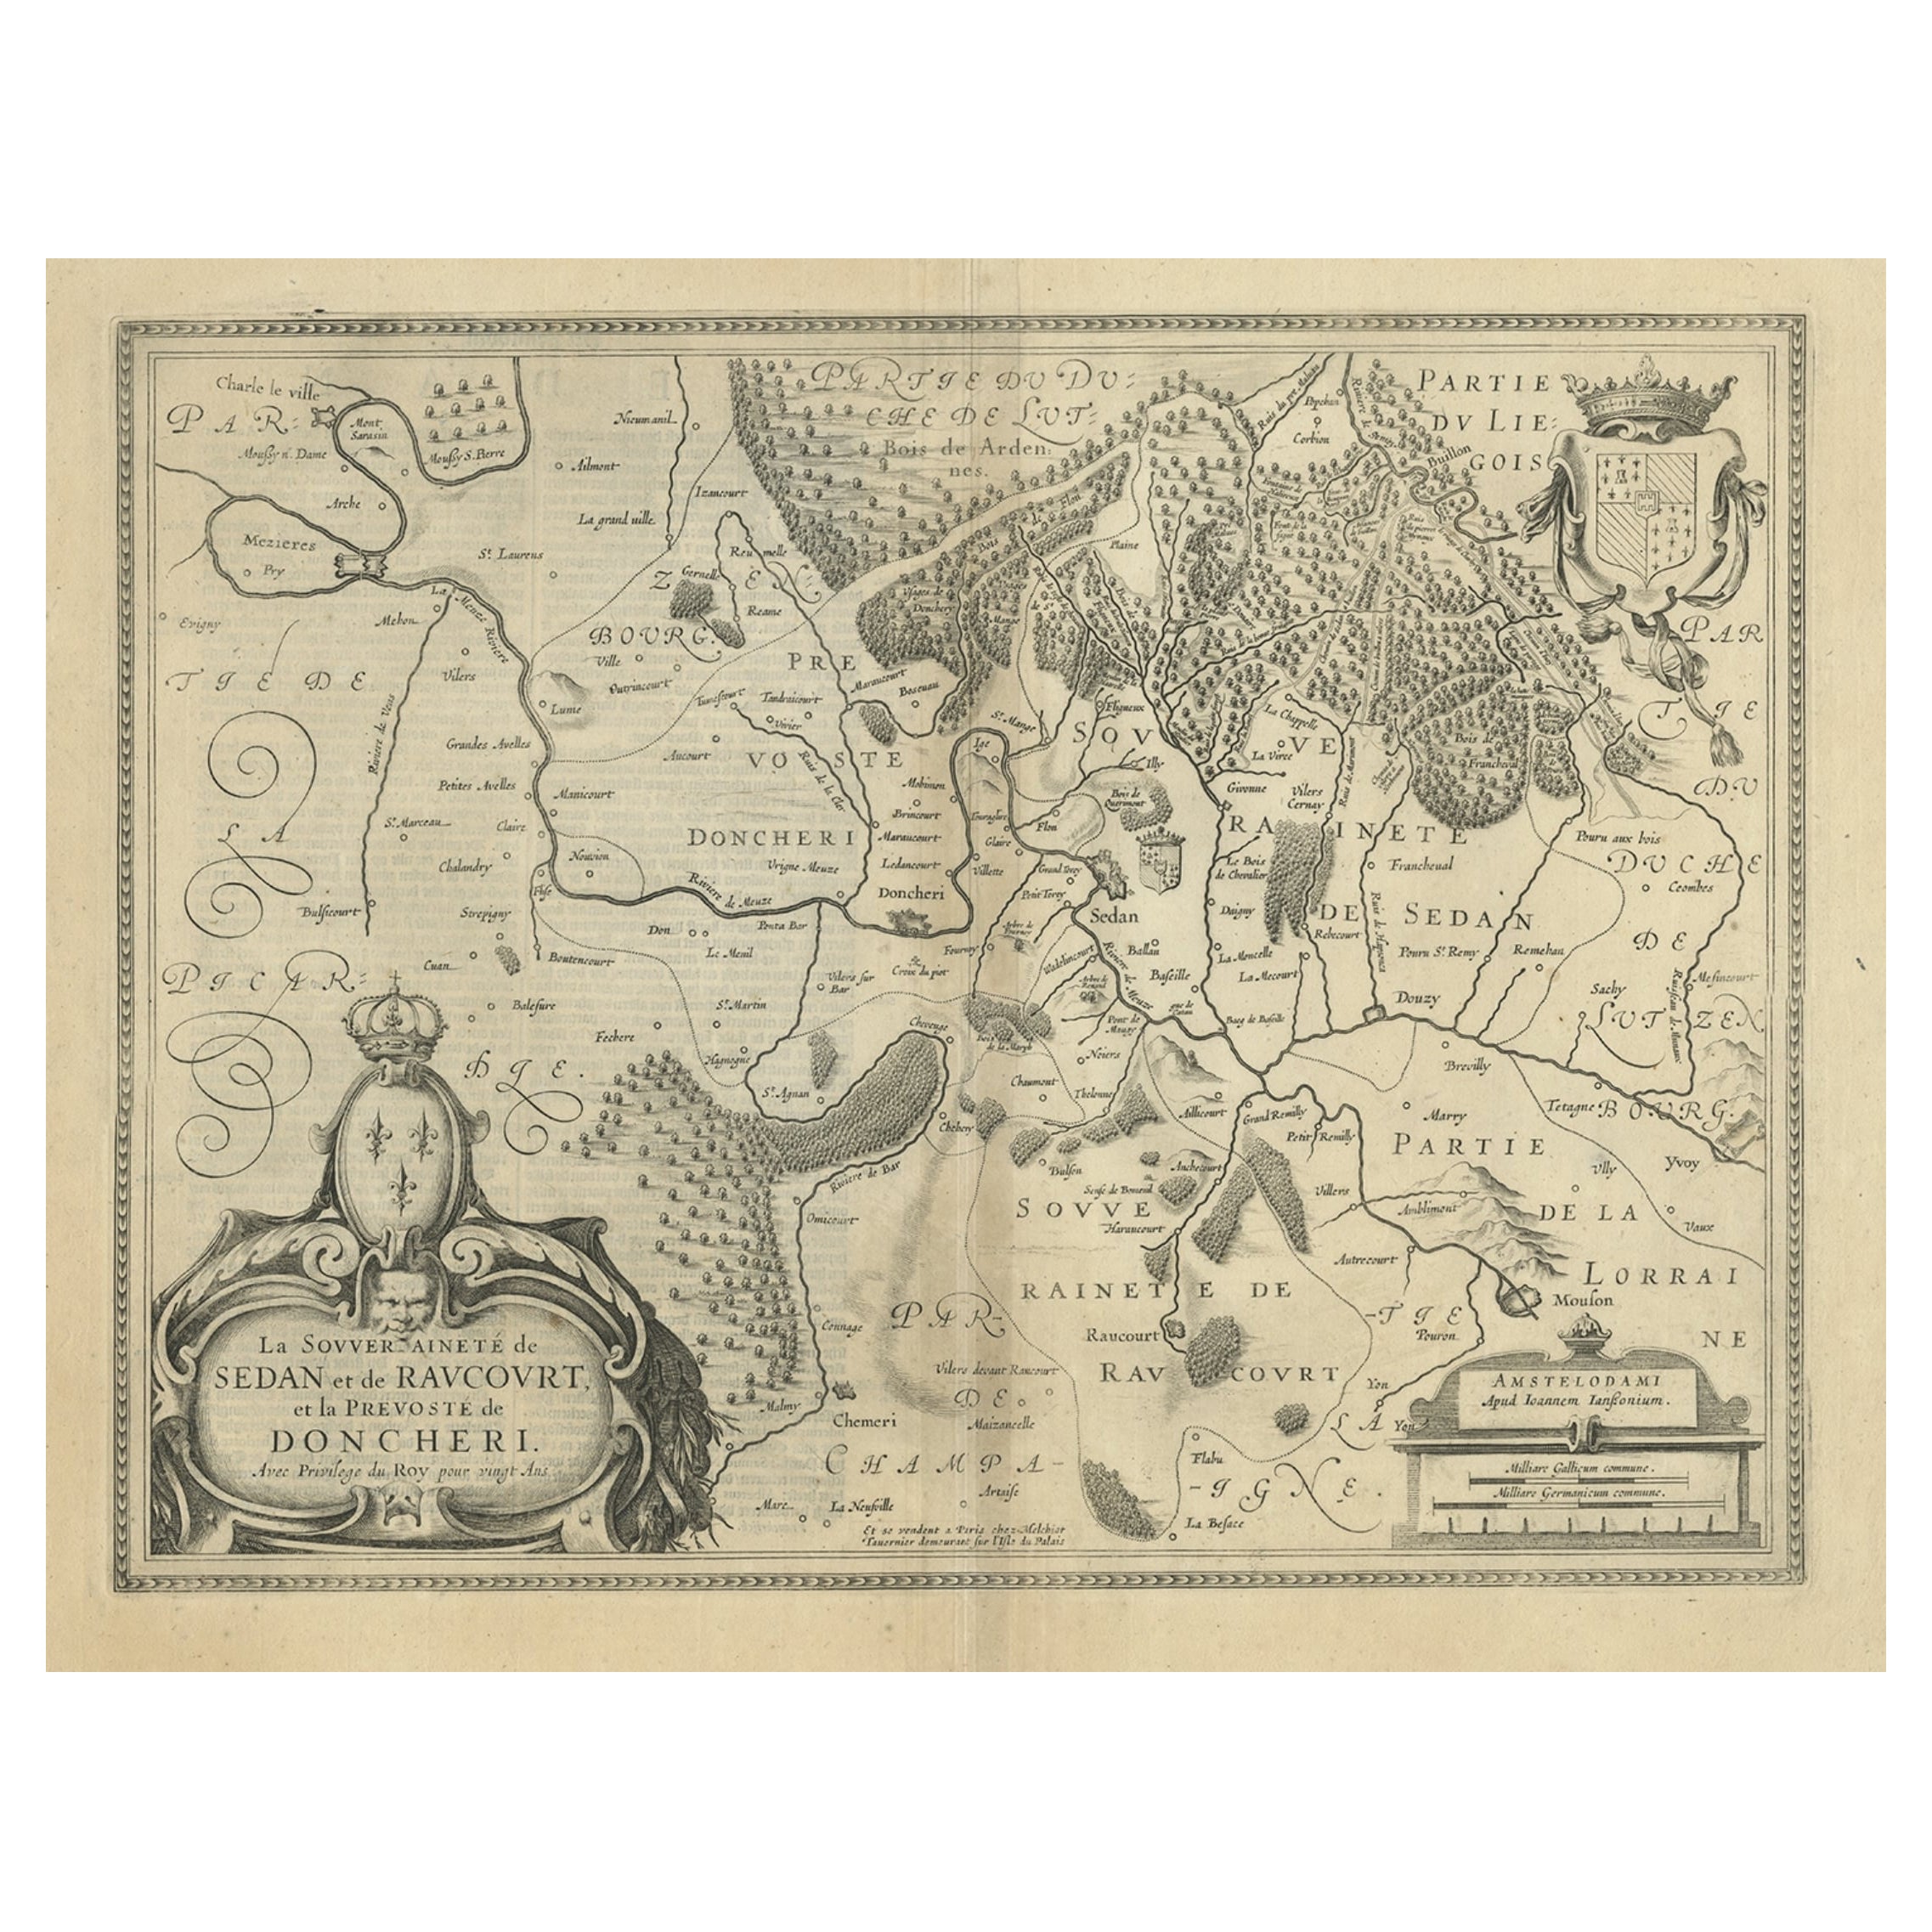 Lovely Antique Map Centered on Sedan and Doncheri and the Meuze River, ca.1650